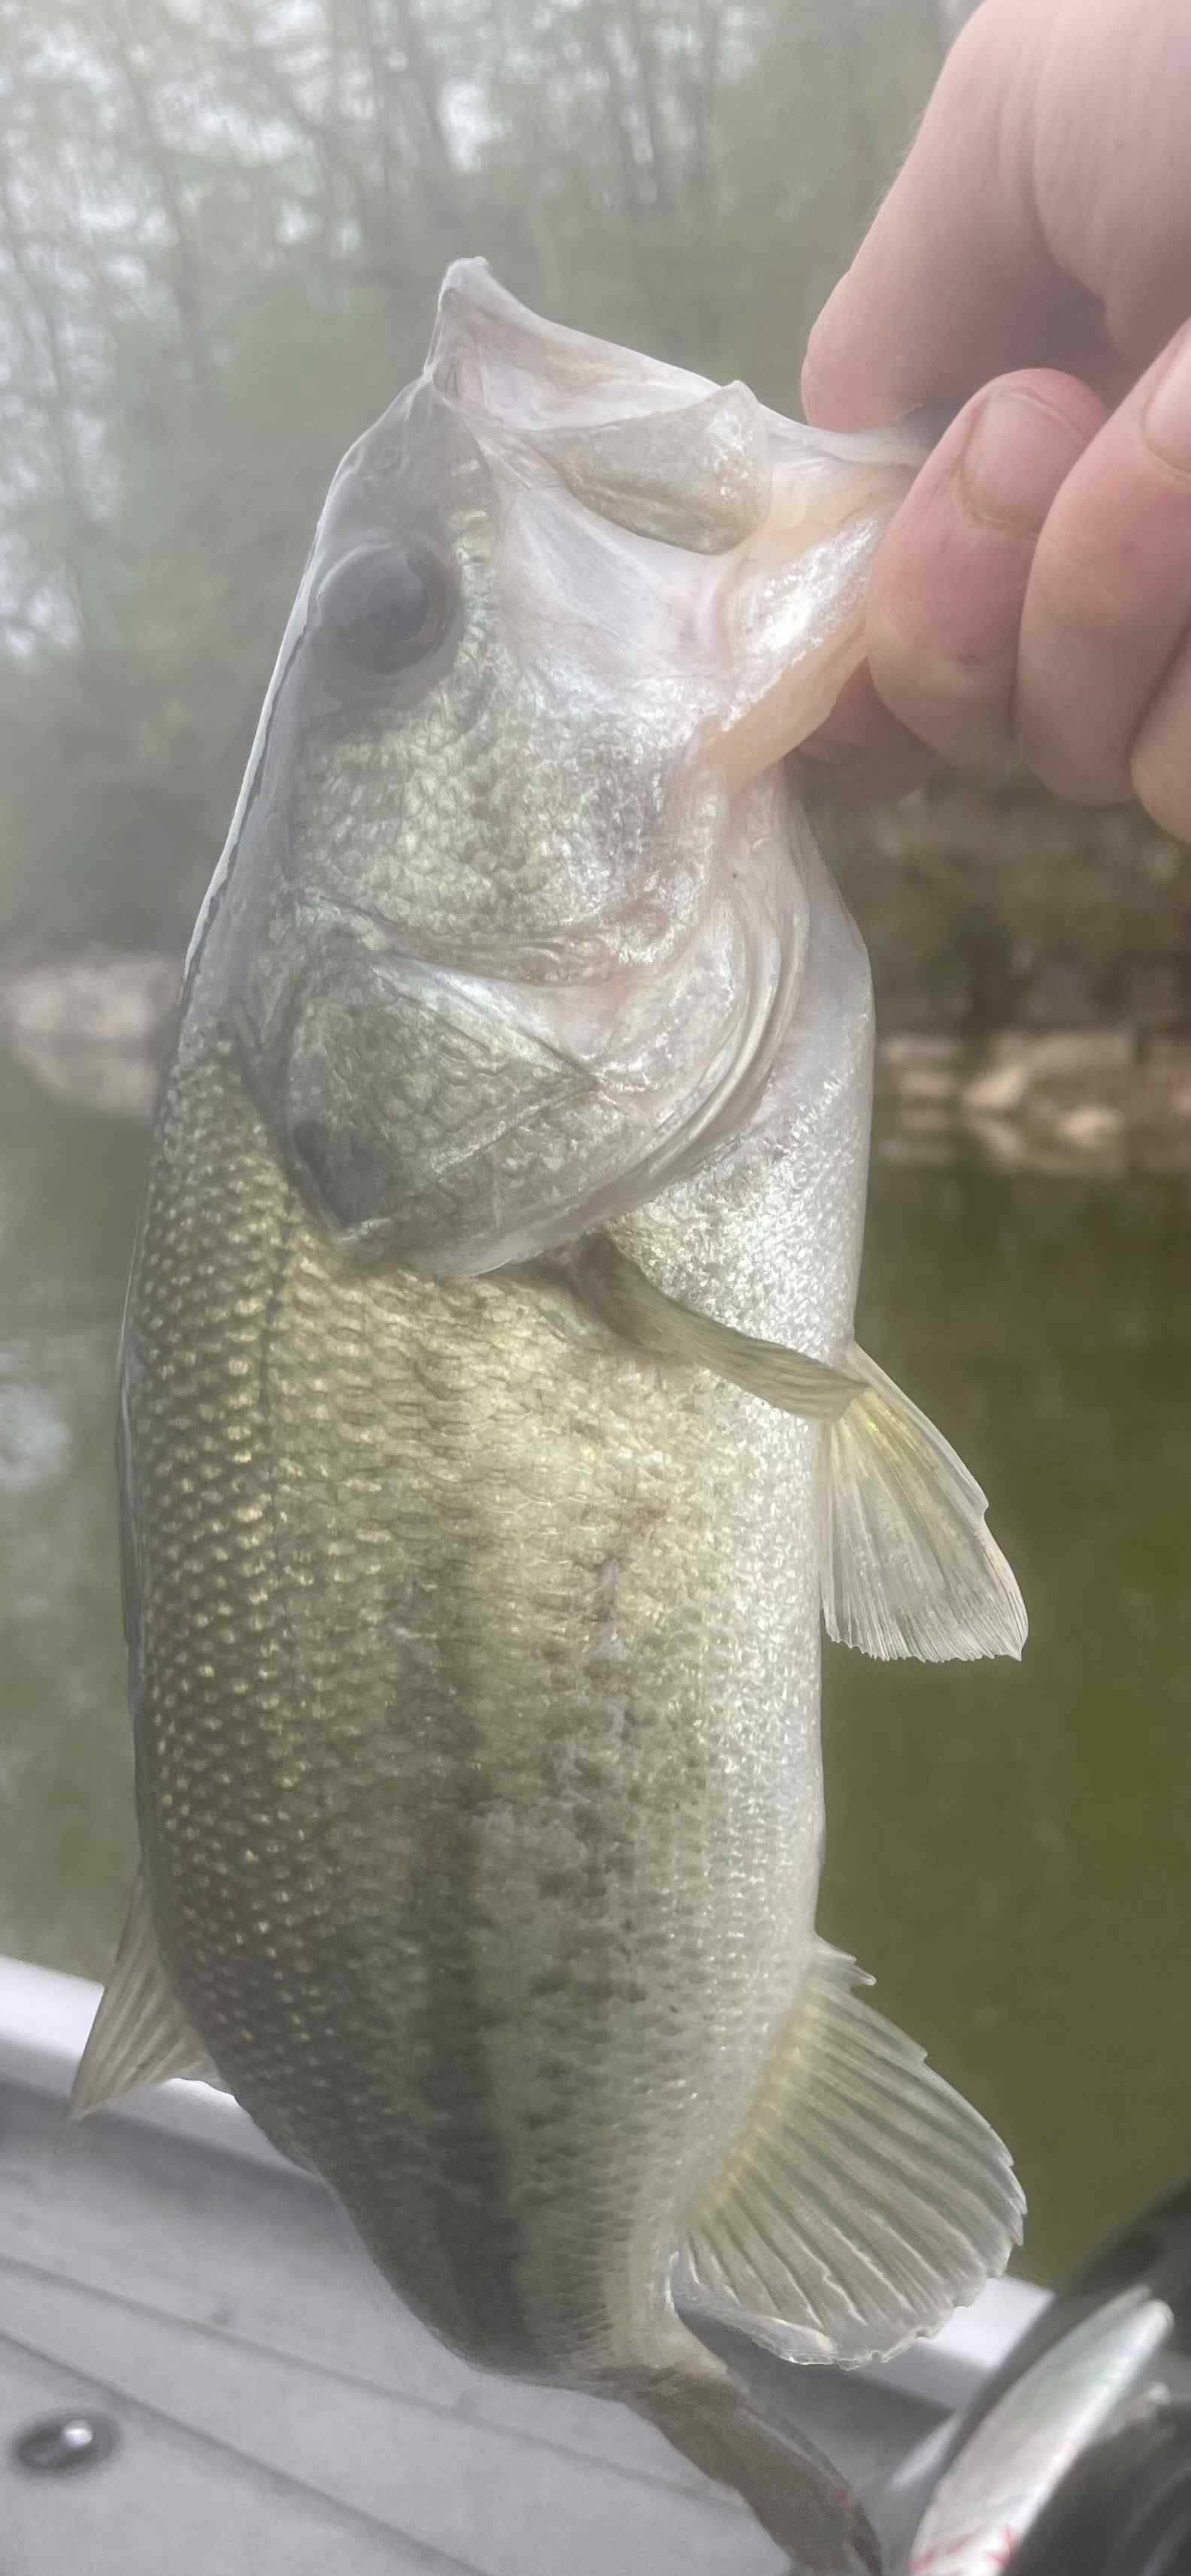 Last weekend I pulled a rod and reel up off the bottom in the marina I fish  a lot. Two minutes ago, I caught my PB largemouth with it. : r/Fishing